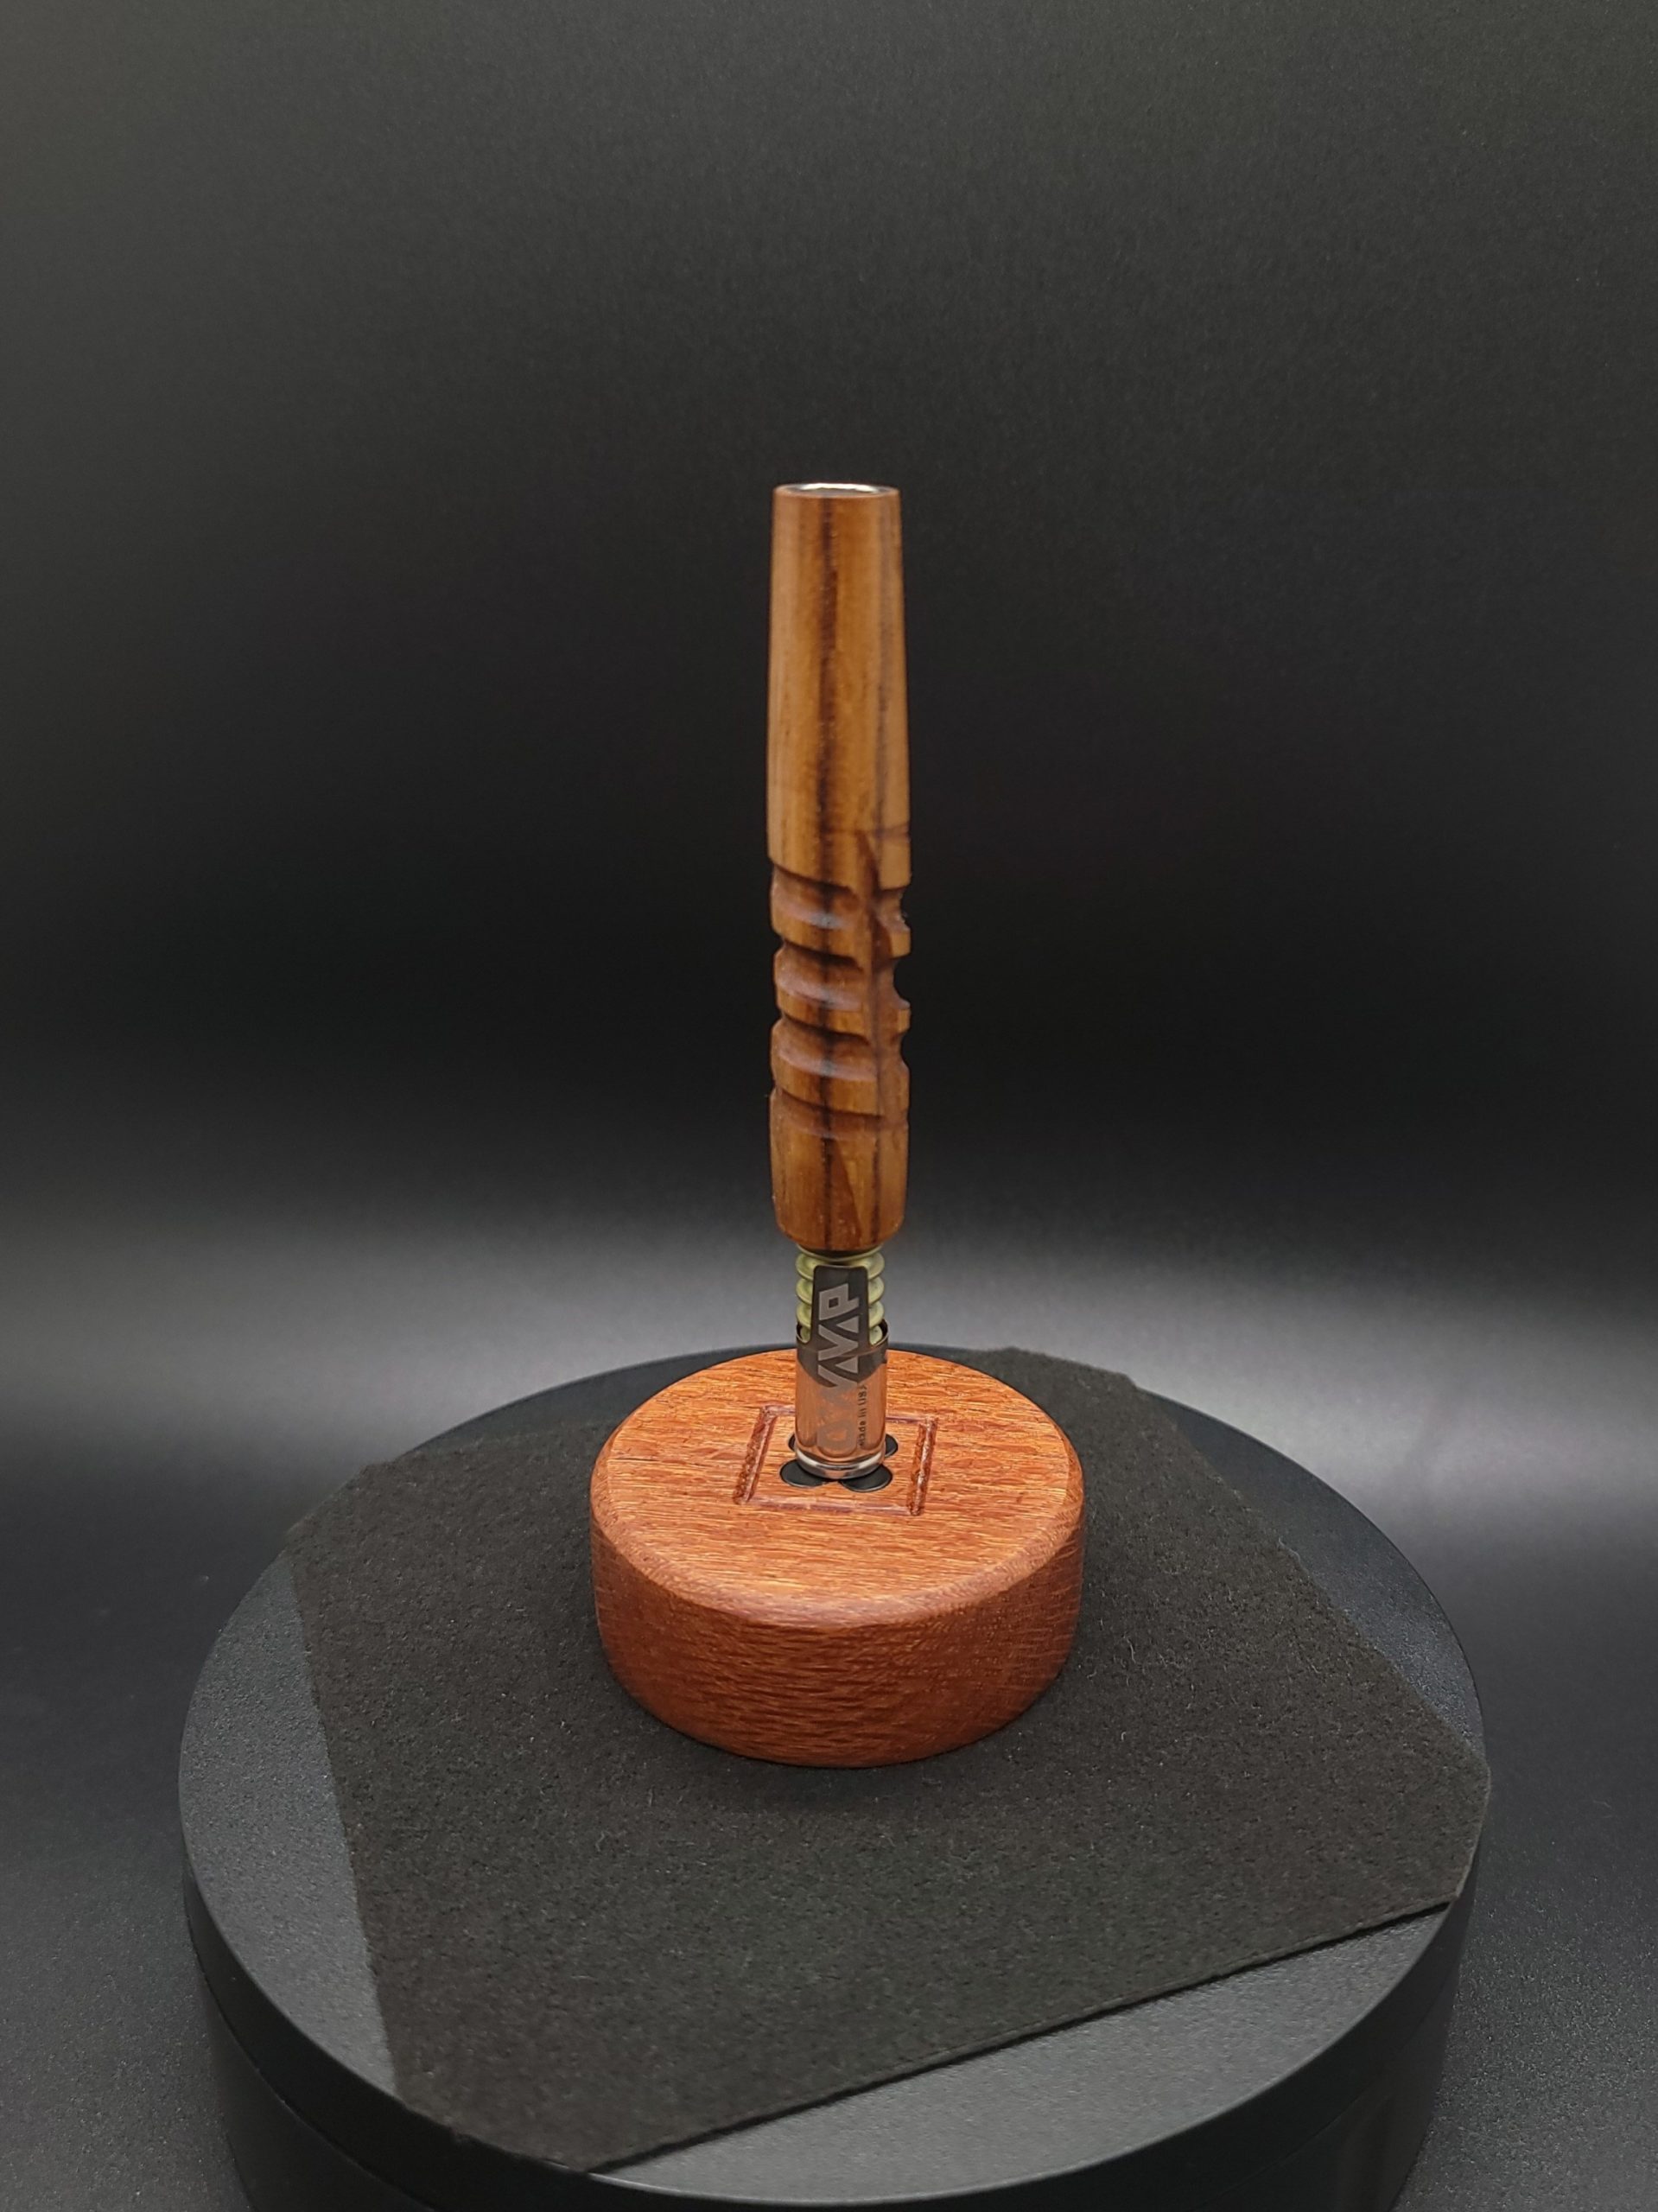 This image portrays Downward Spiral XL-Teak Wood-Dynavap Stem-NEW! by Dovetail Woodwork.